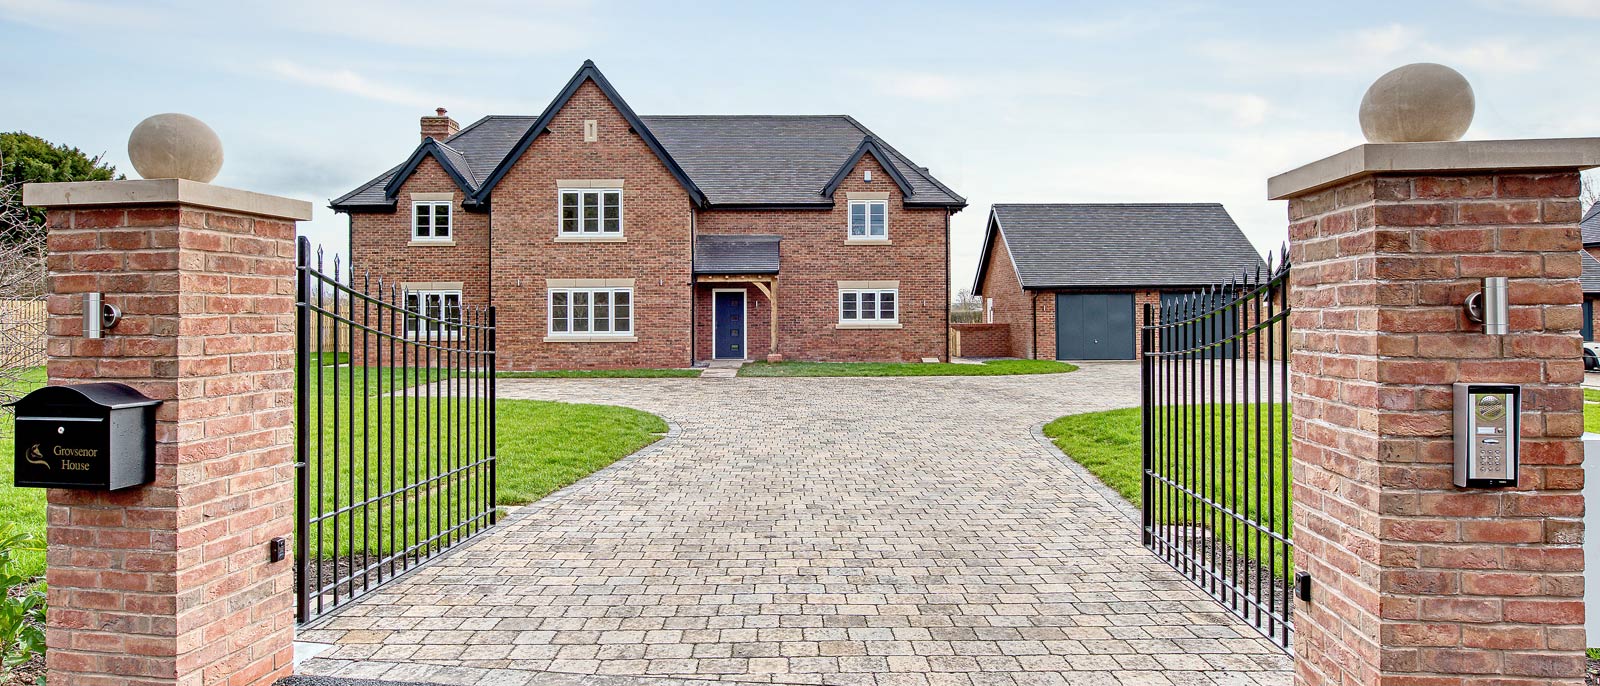 New Homes In Shropshire | Days New Homes